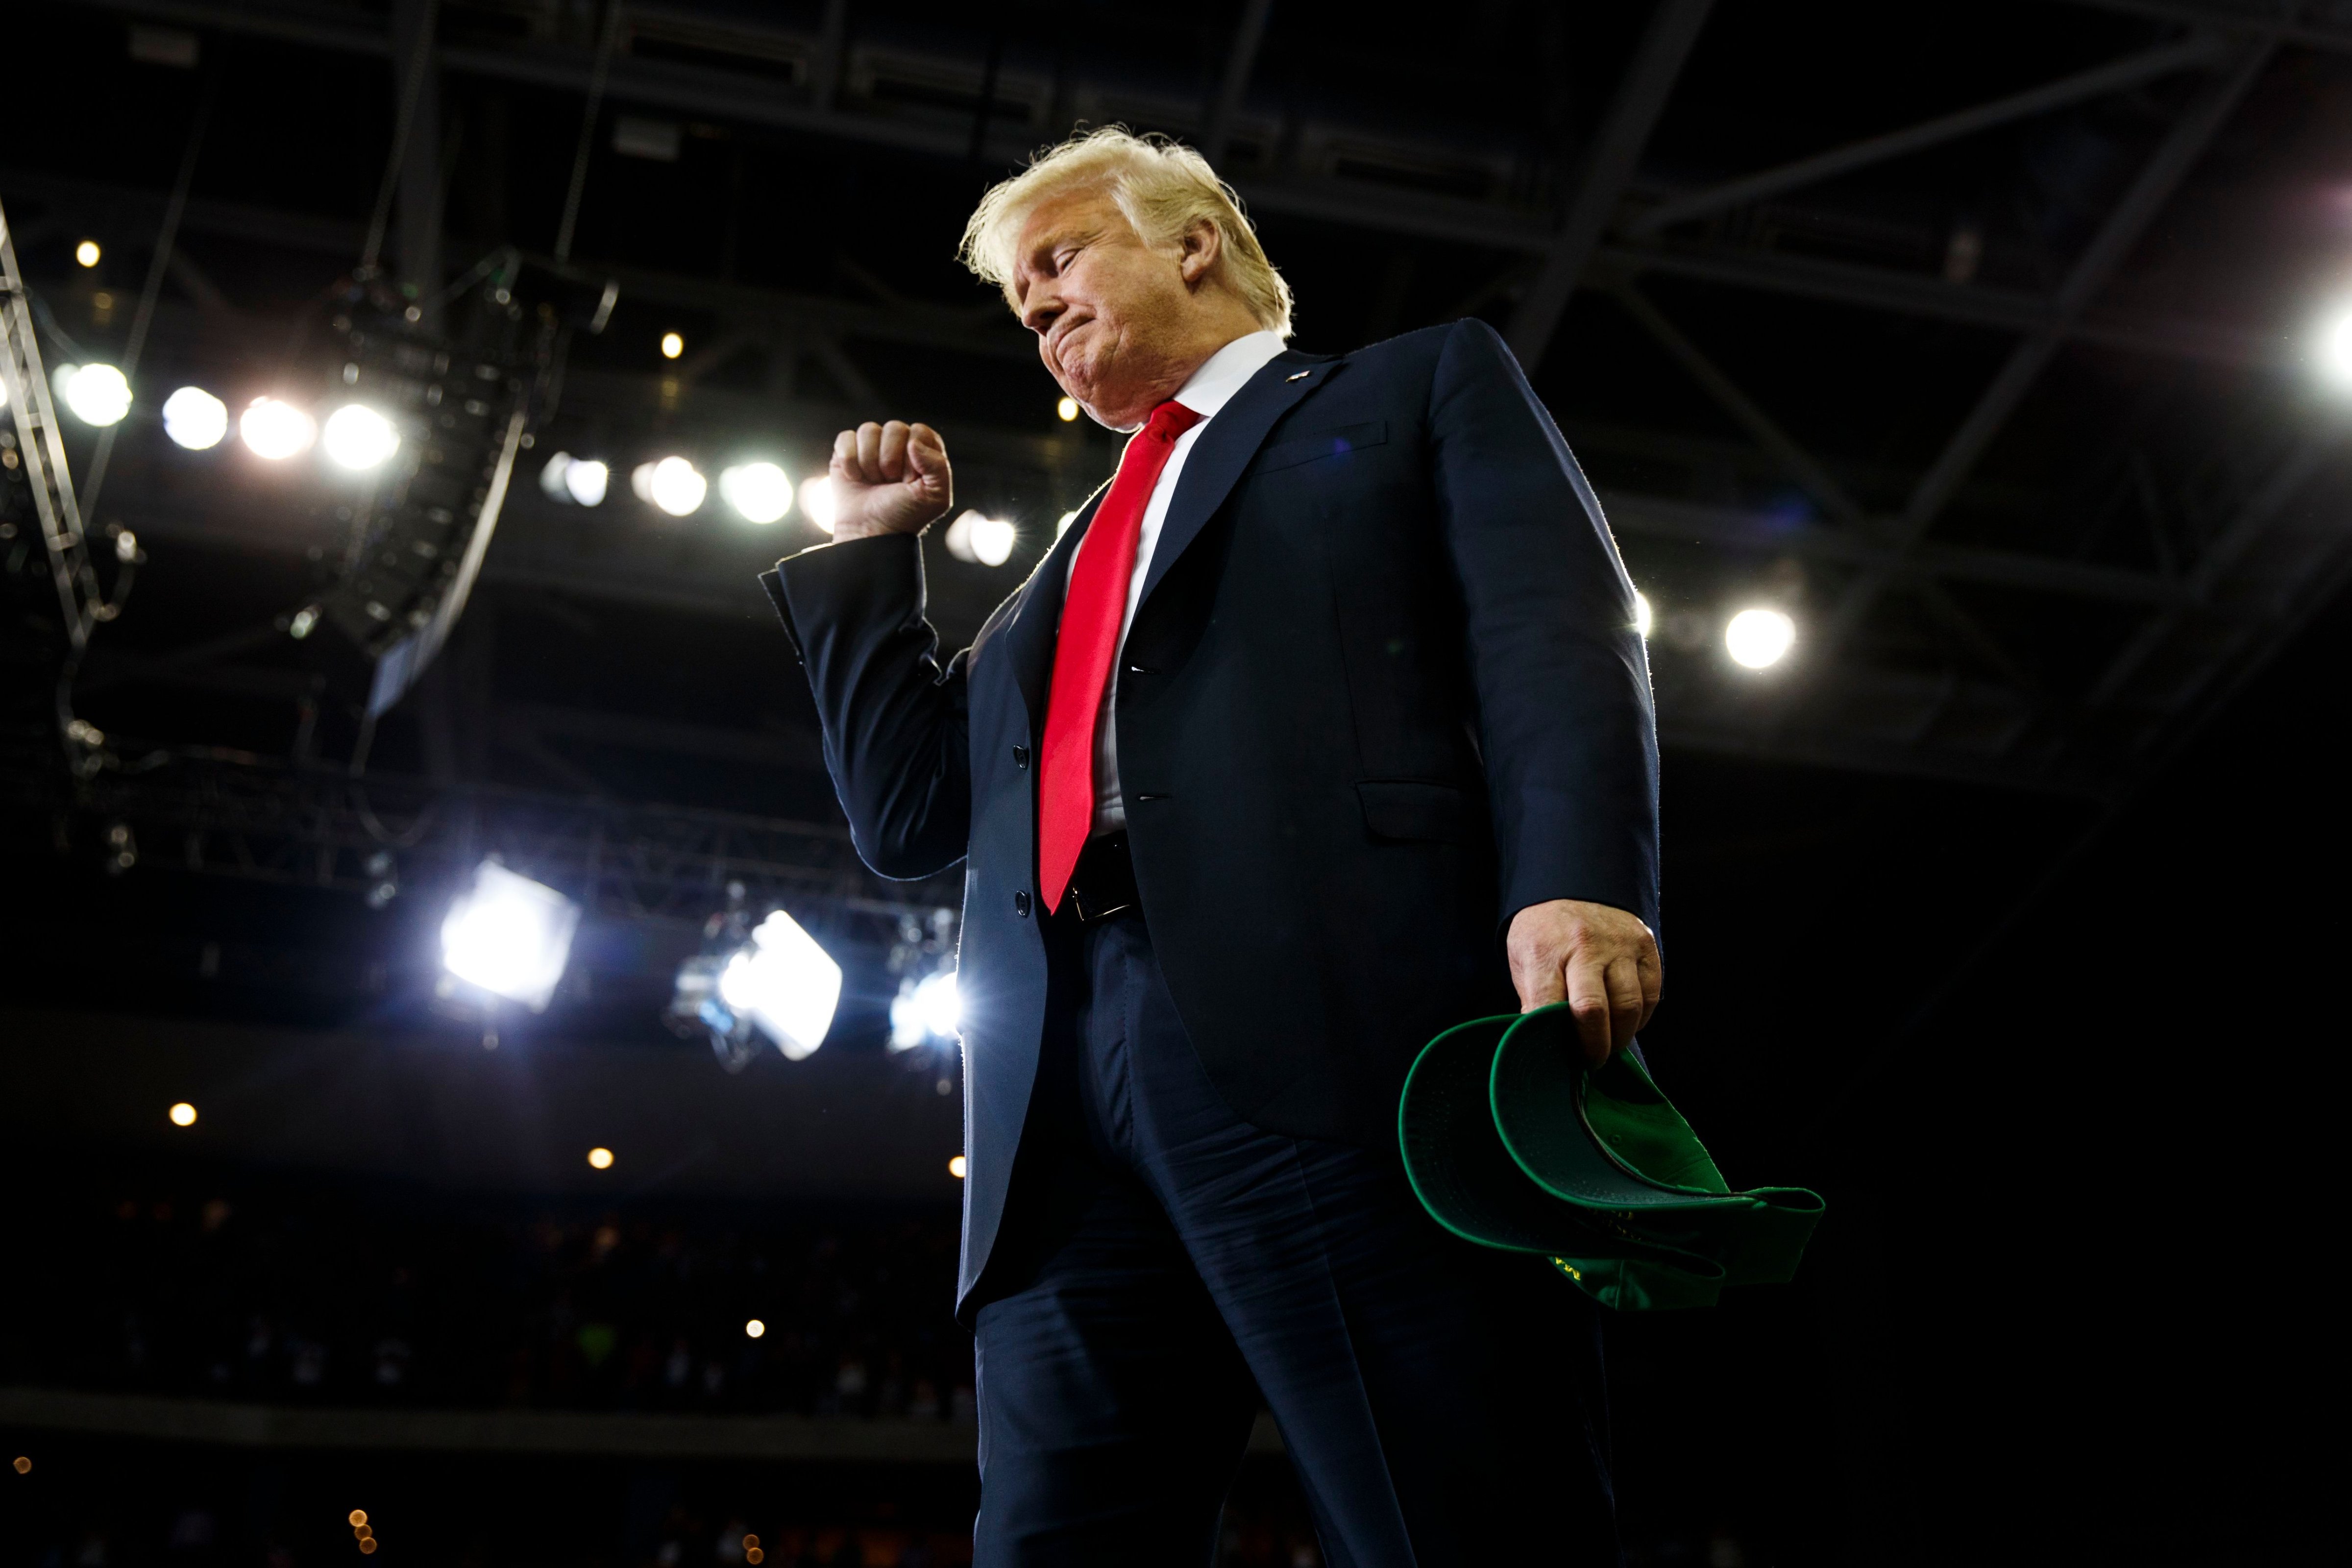 President Donald Trump pumps his fist as he arrives to a campaign rally at the Ford Center, in Evansville, Ind., on Aug. 30, 2018. (Evan Vucci—AP/Shutterstock)